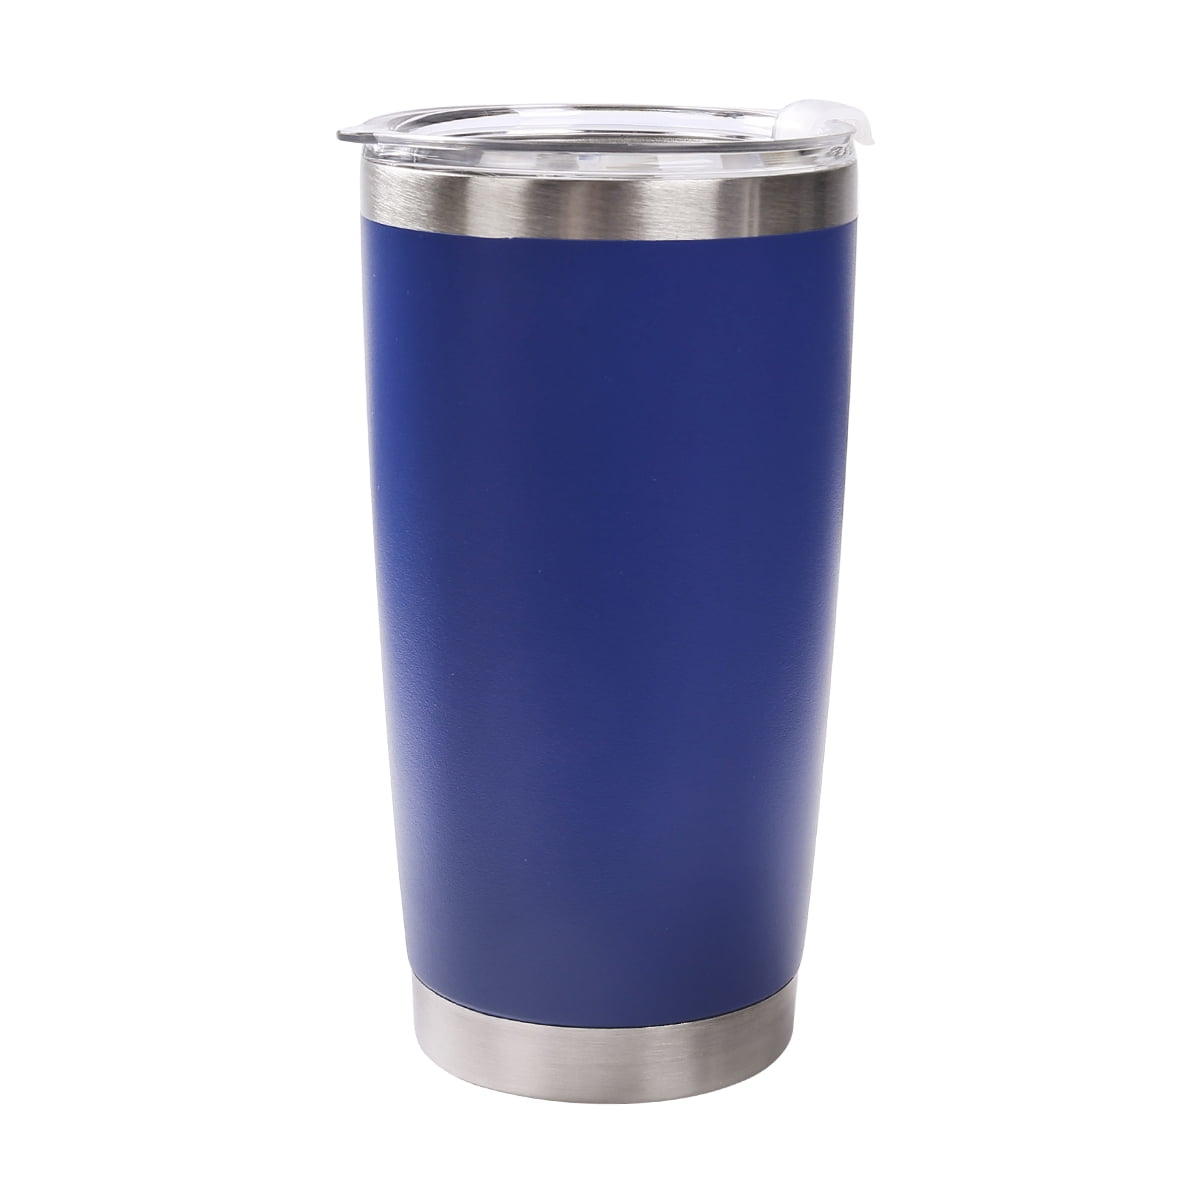 1pc Dark Blue Insulated Stainless Steel Glass, Reusable Steel